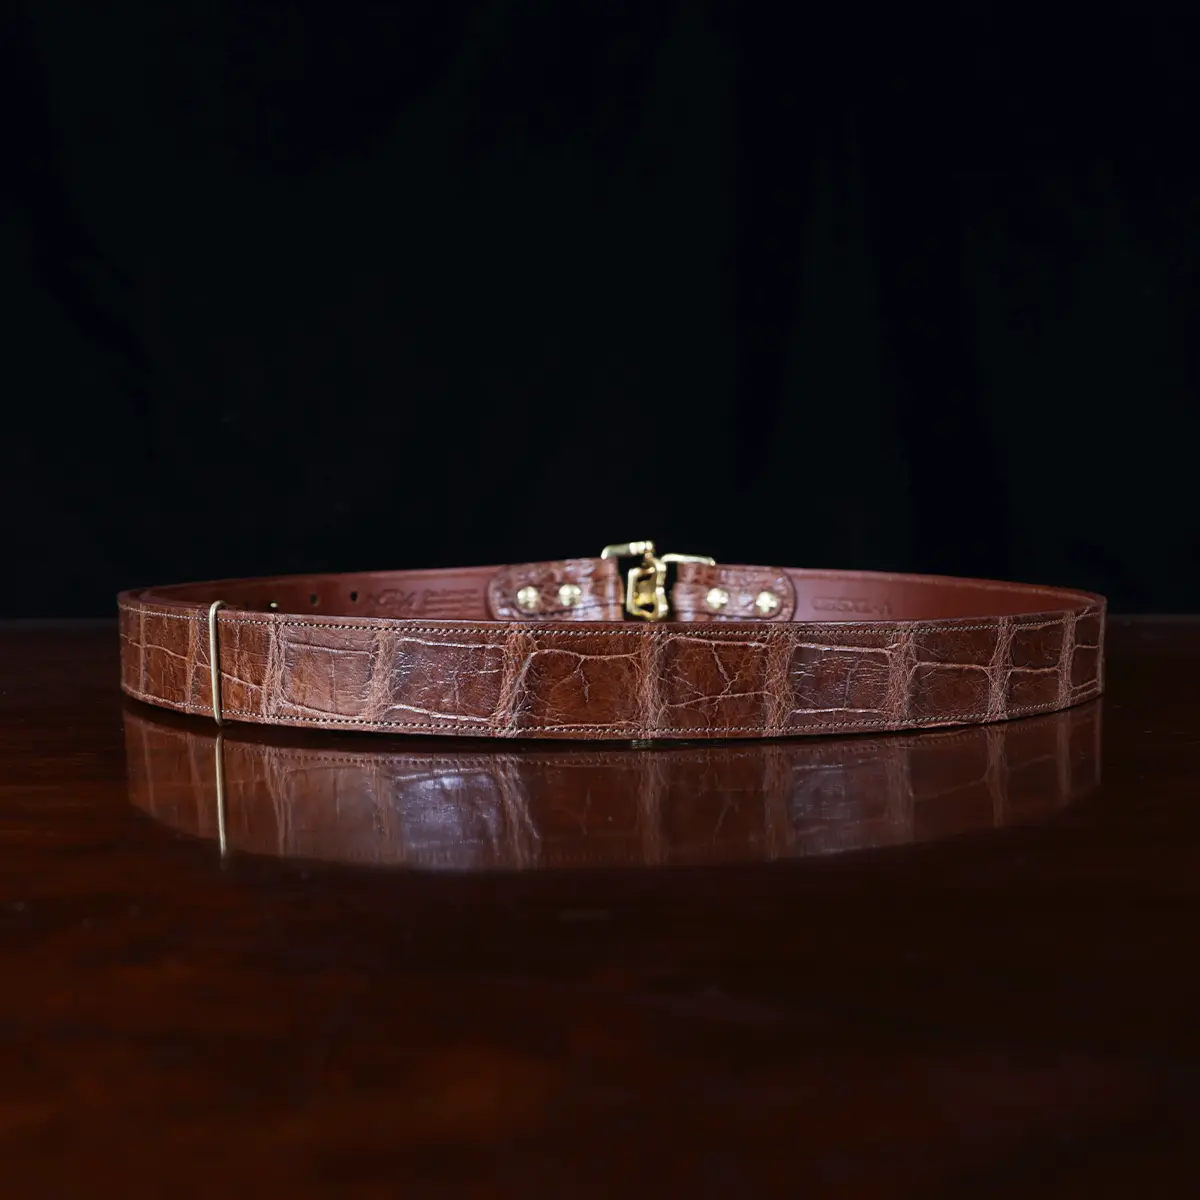 No. 5 Cinch Belt in brown American Alligator and brass buckle - ID 002 - back view on black background